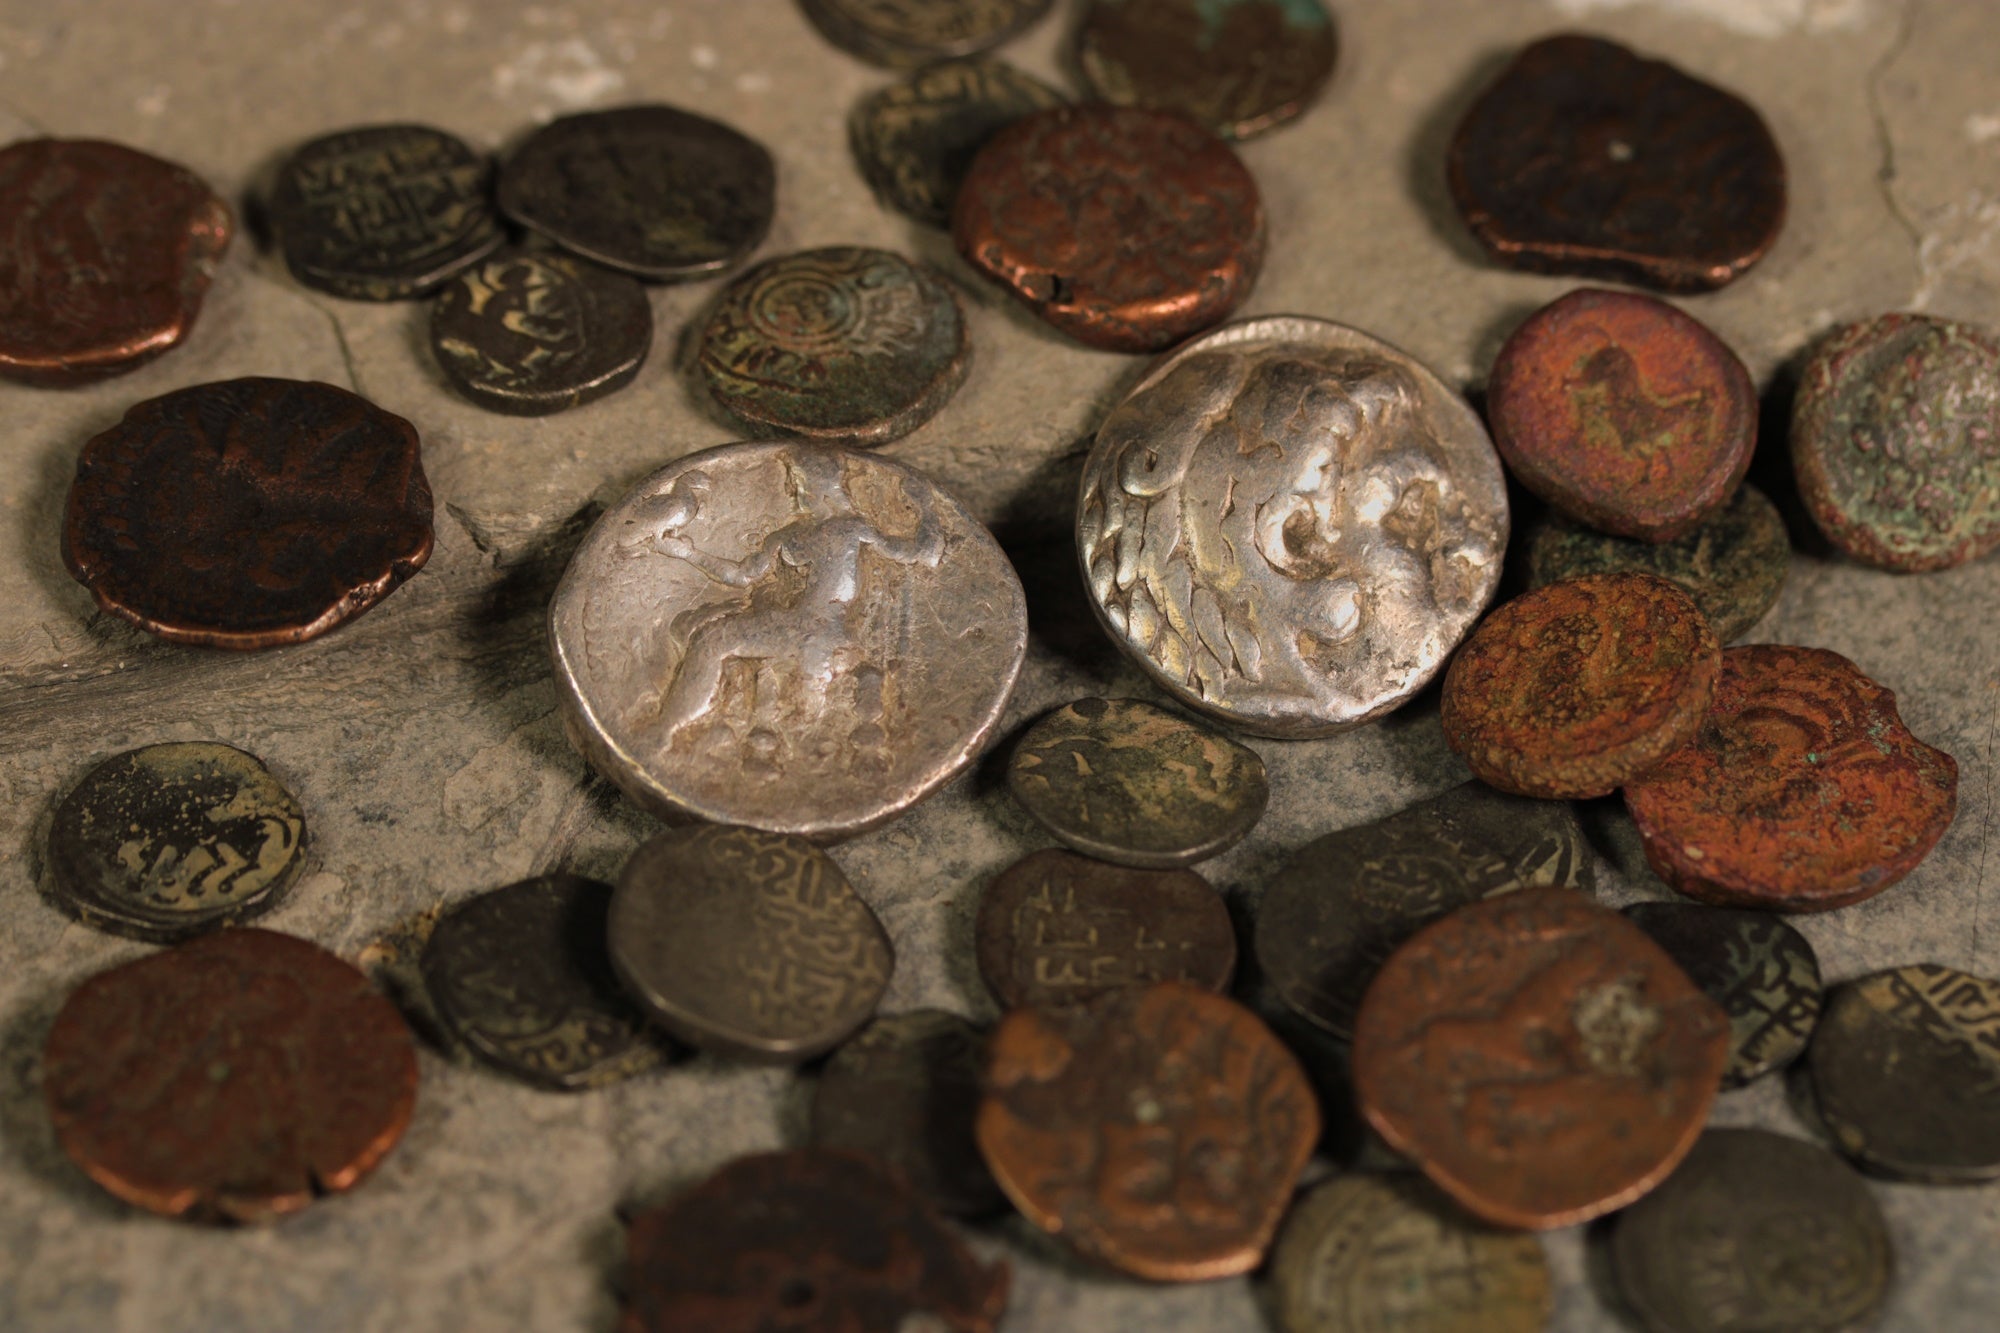 August 30th Special Offer: Coins of Carthage, Egypt, and More